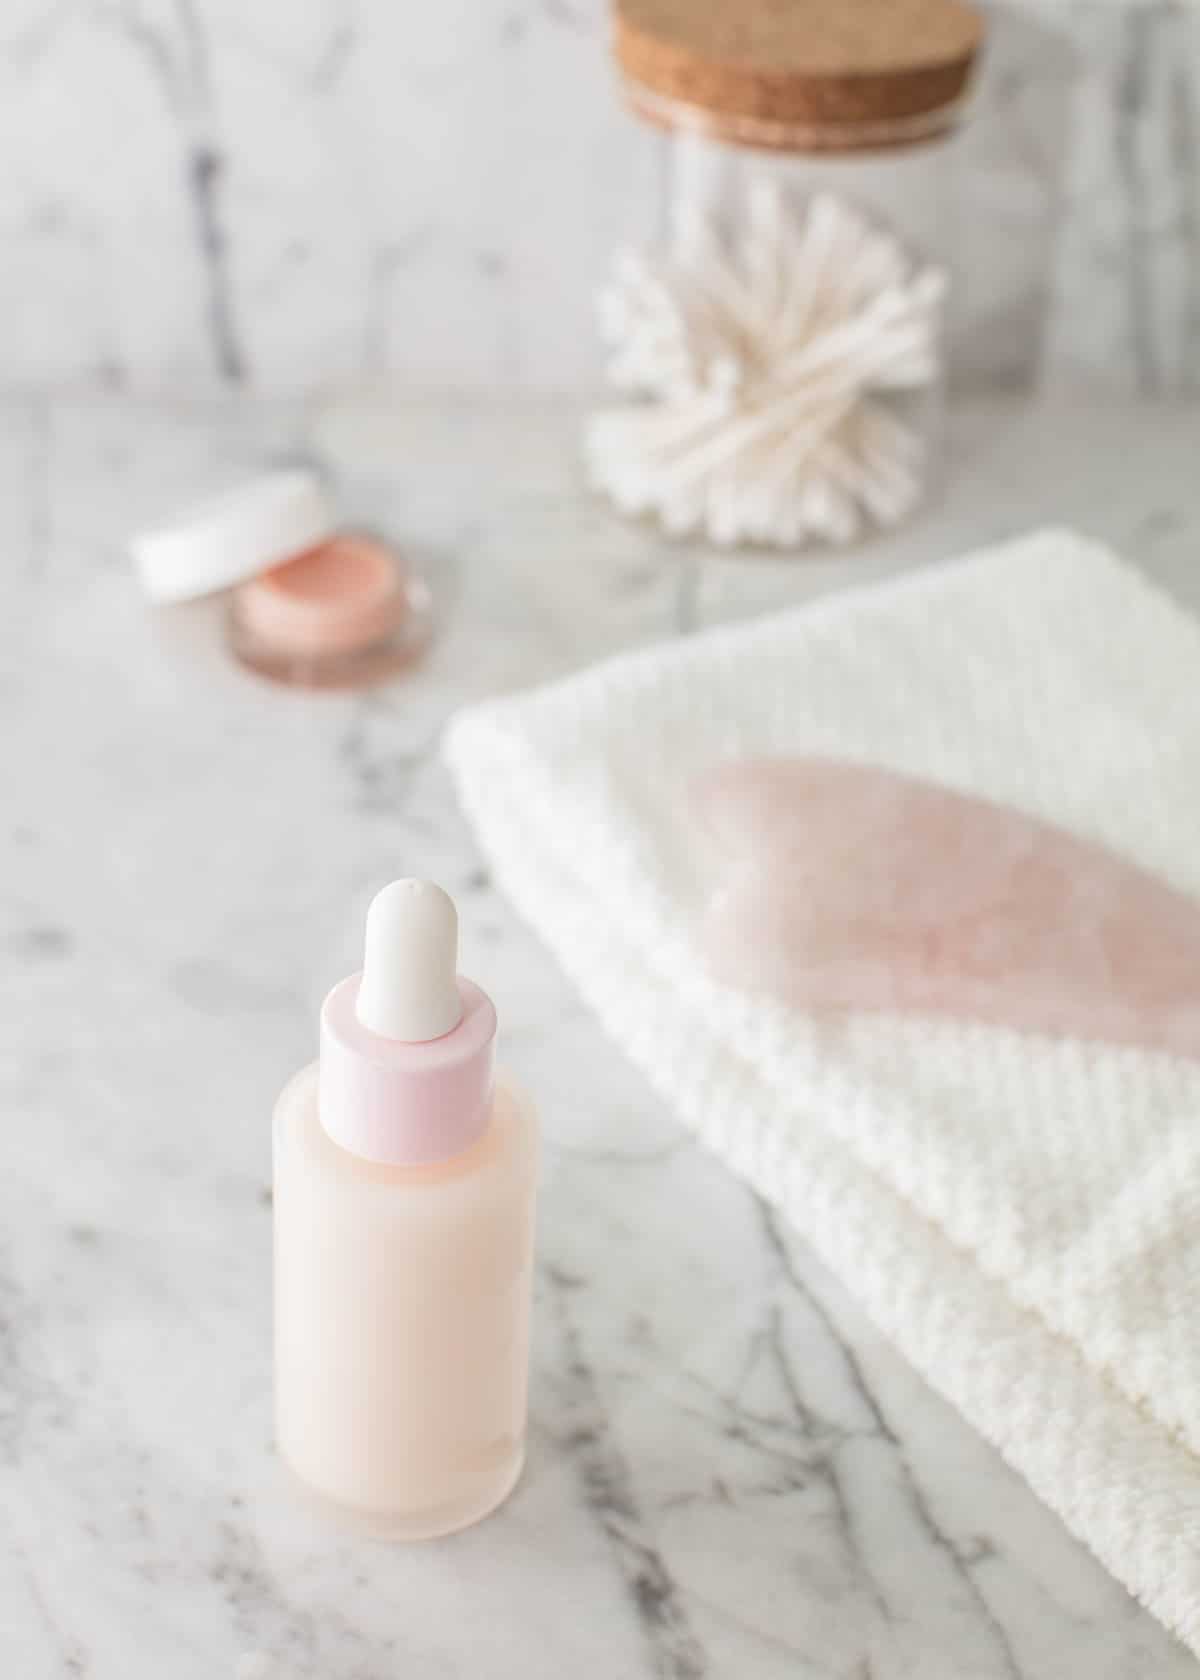 Pink bottle on a marble counter next to other beauty products.